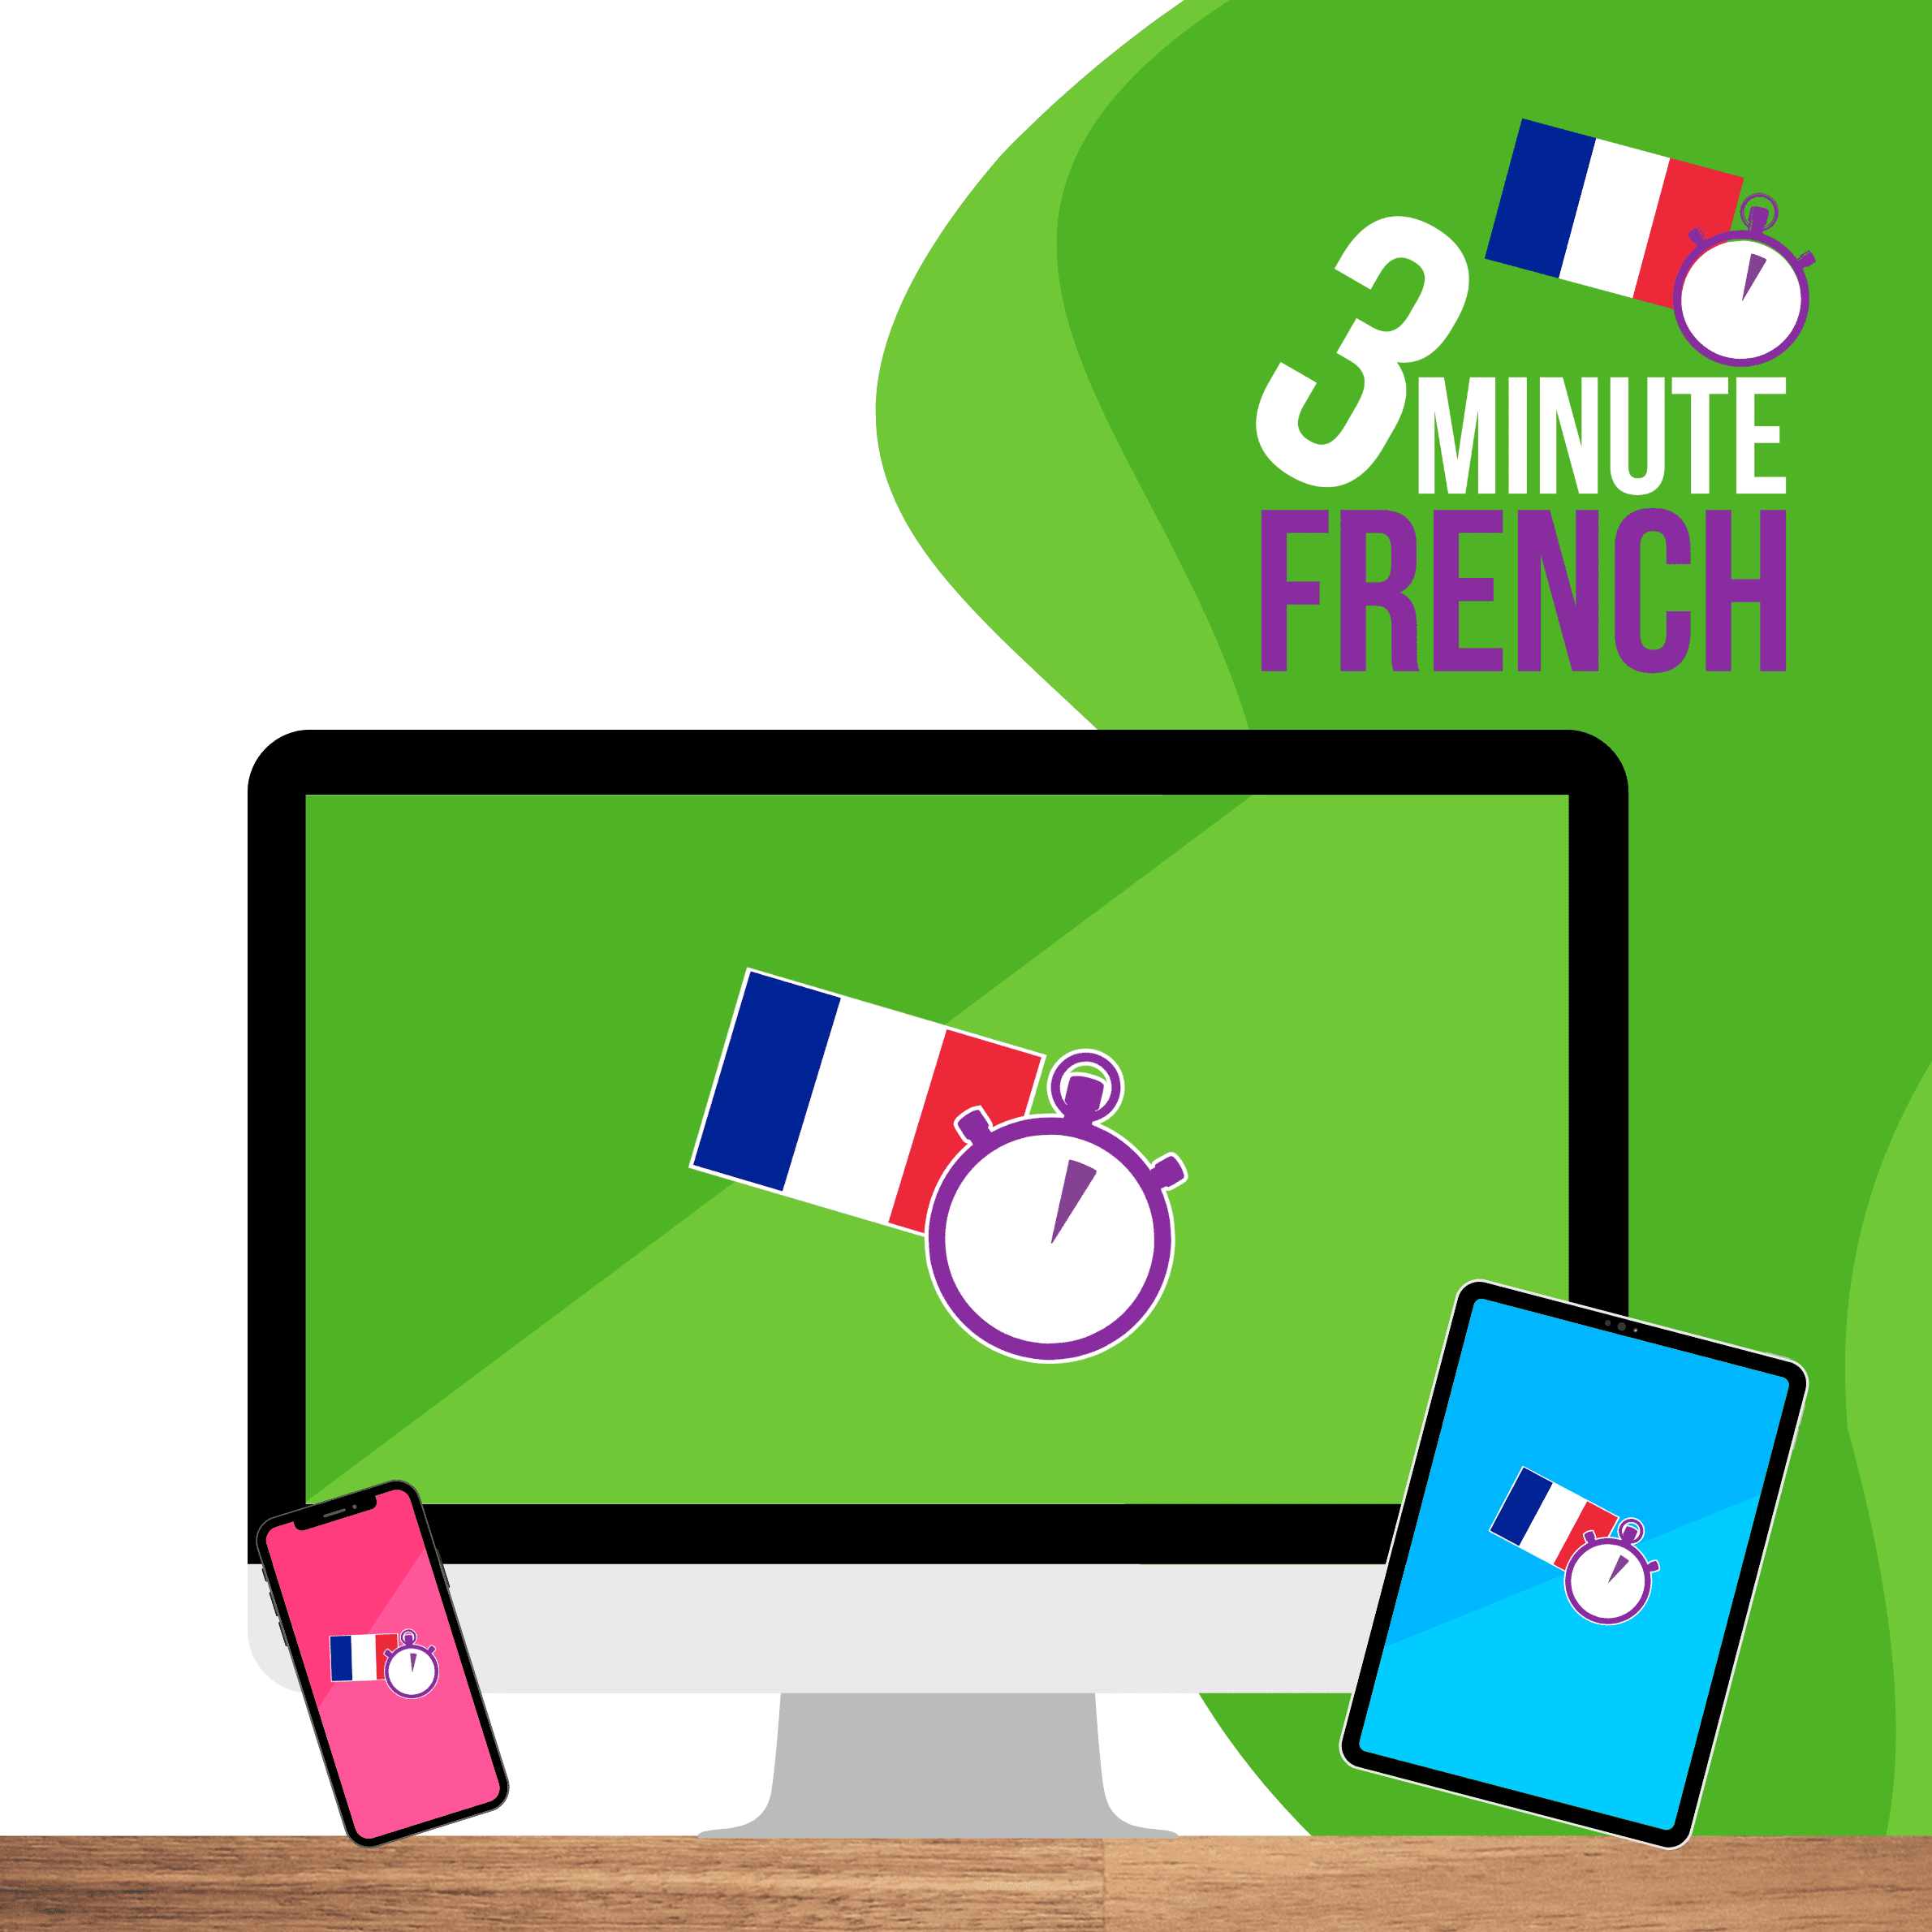 3 Minute French